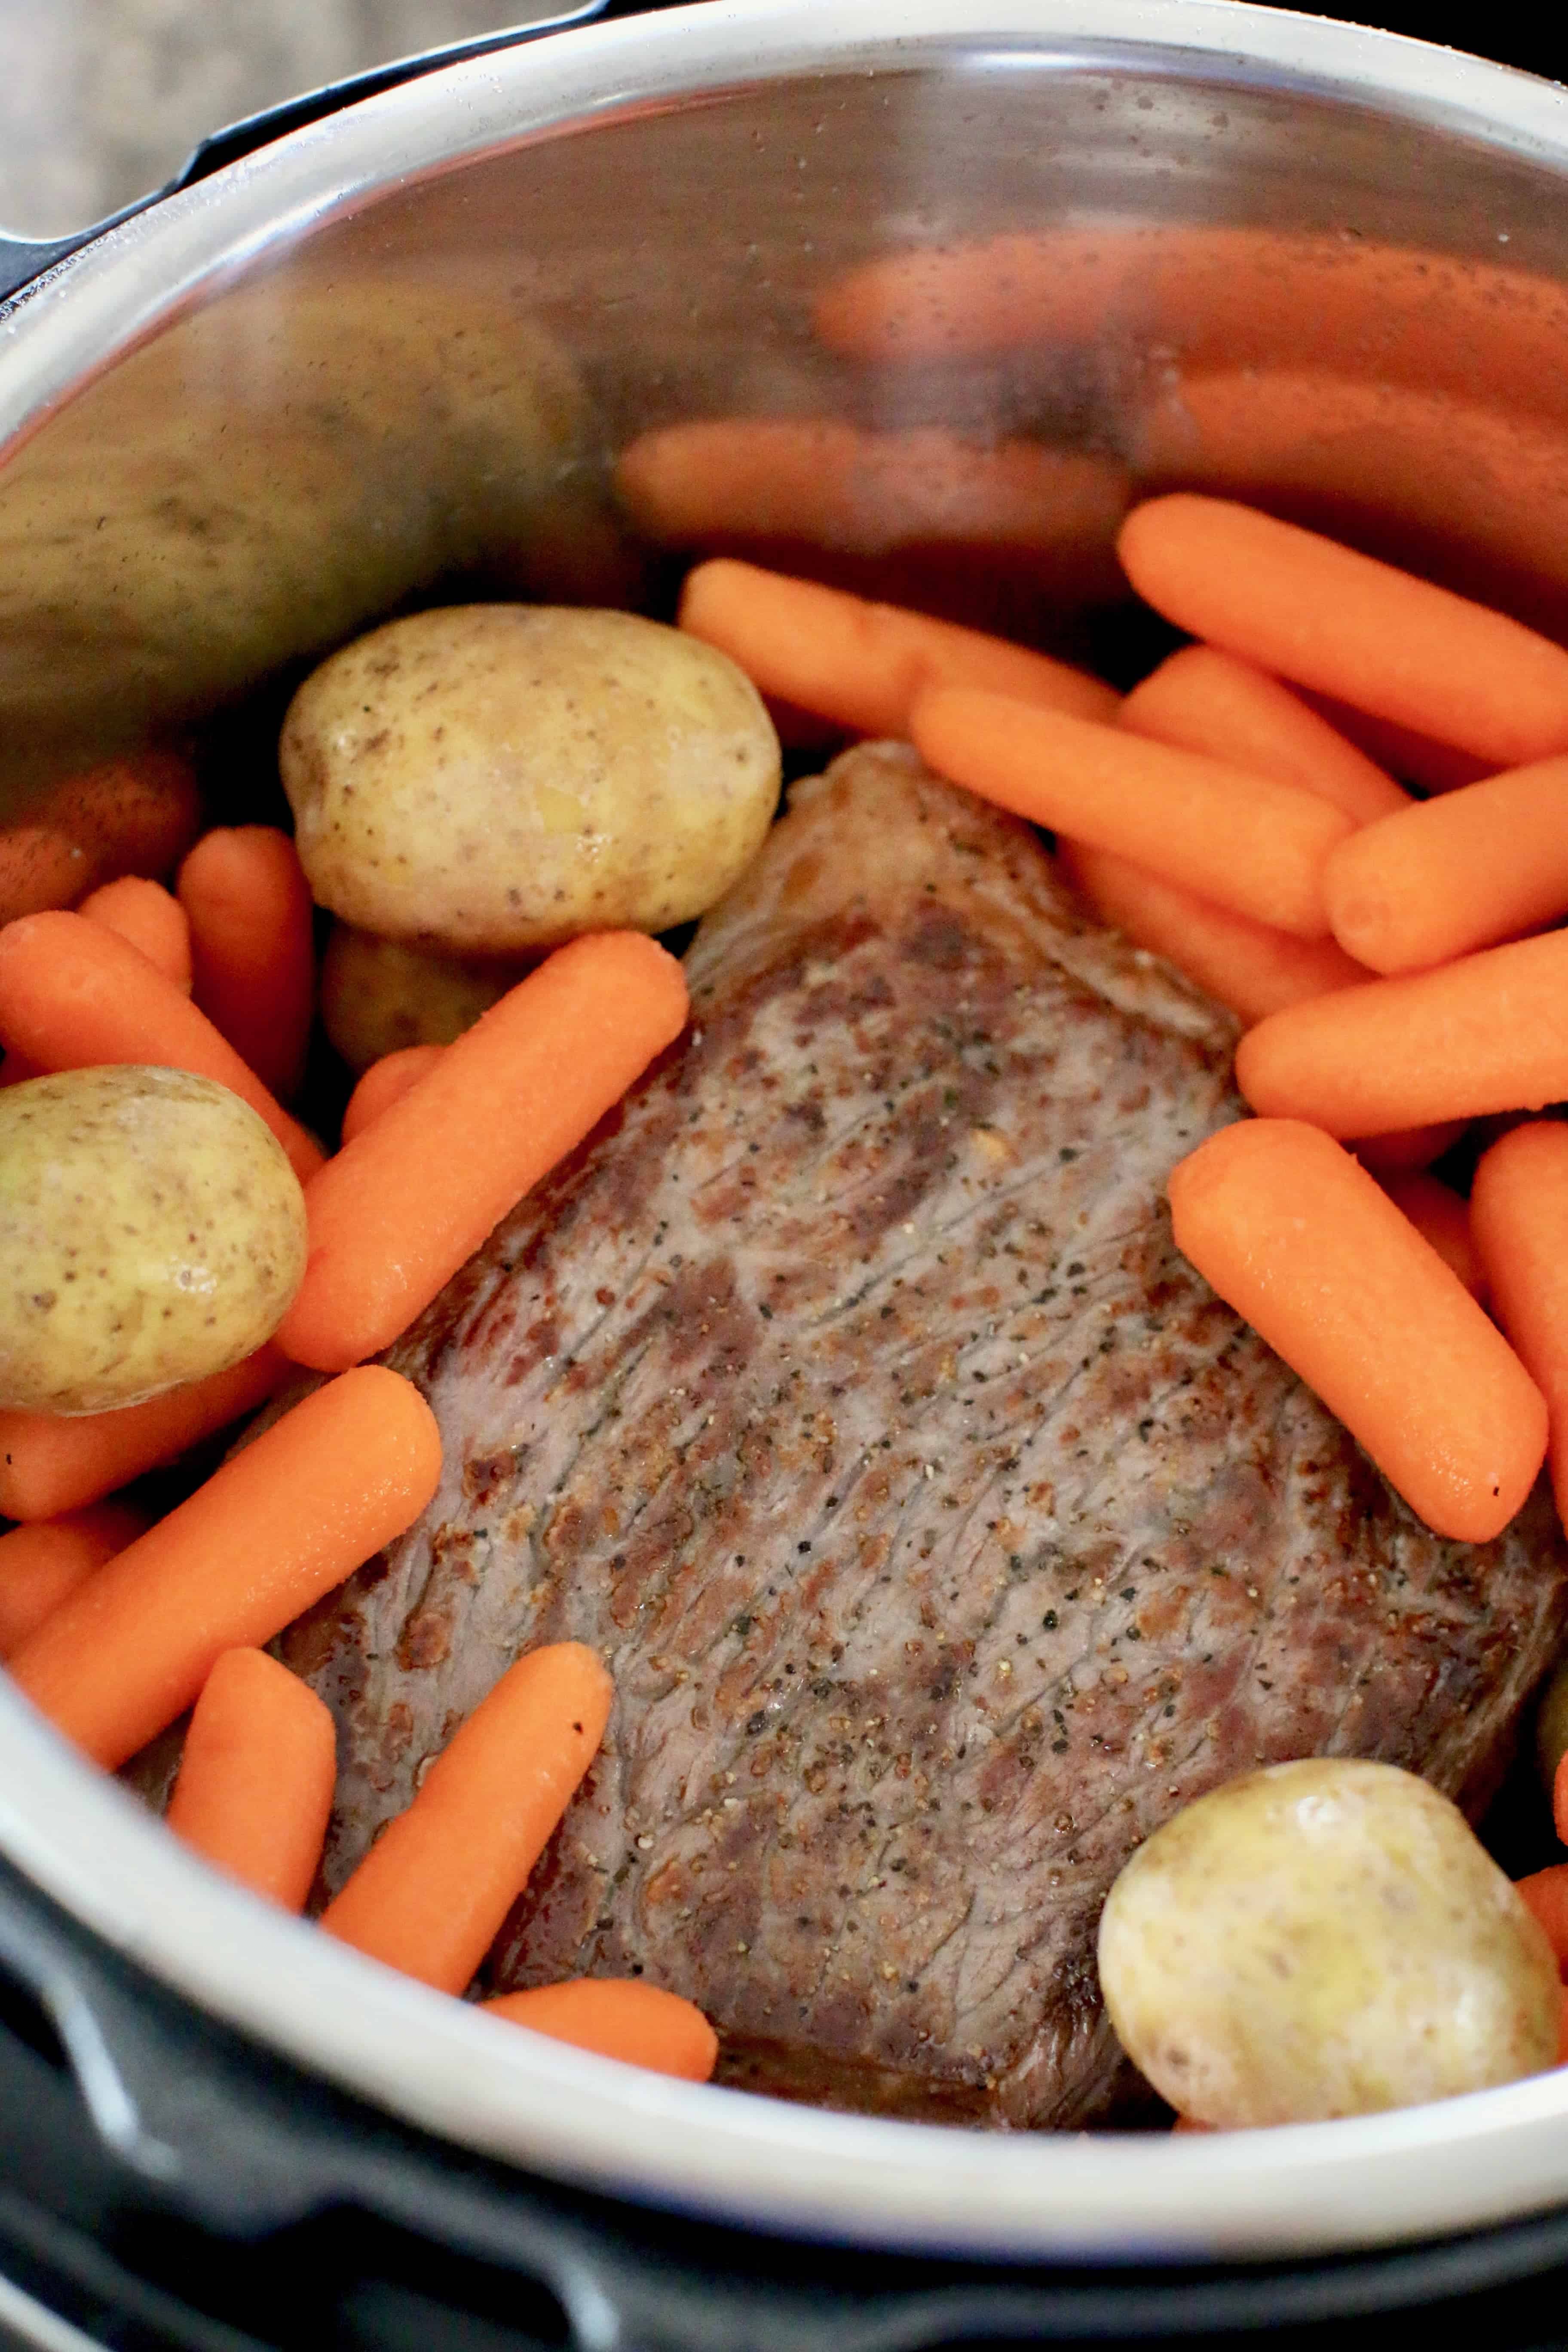 baby carrots, Little Potatoes and beef rump roast added to electric pressure cooker insert.